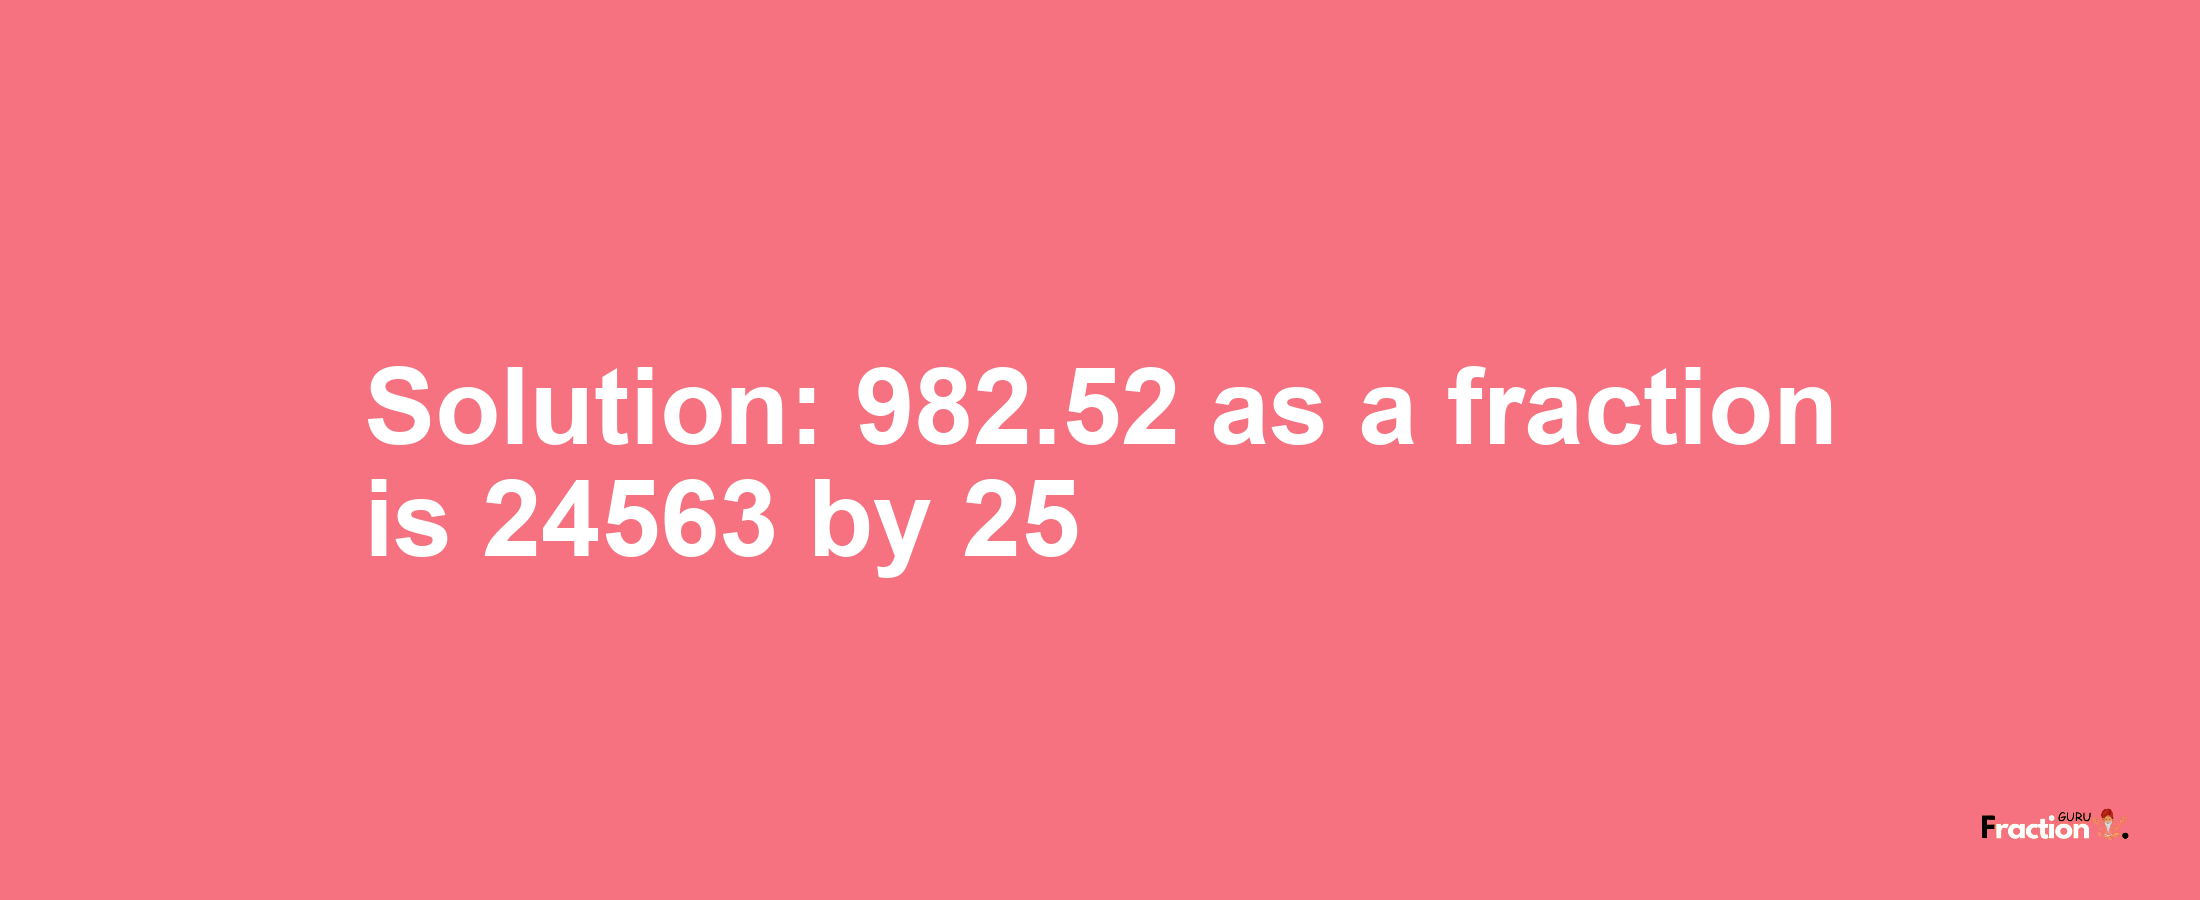 Solution:982.52 as a fraction is 24563/25